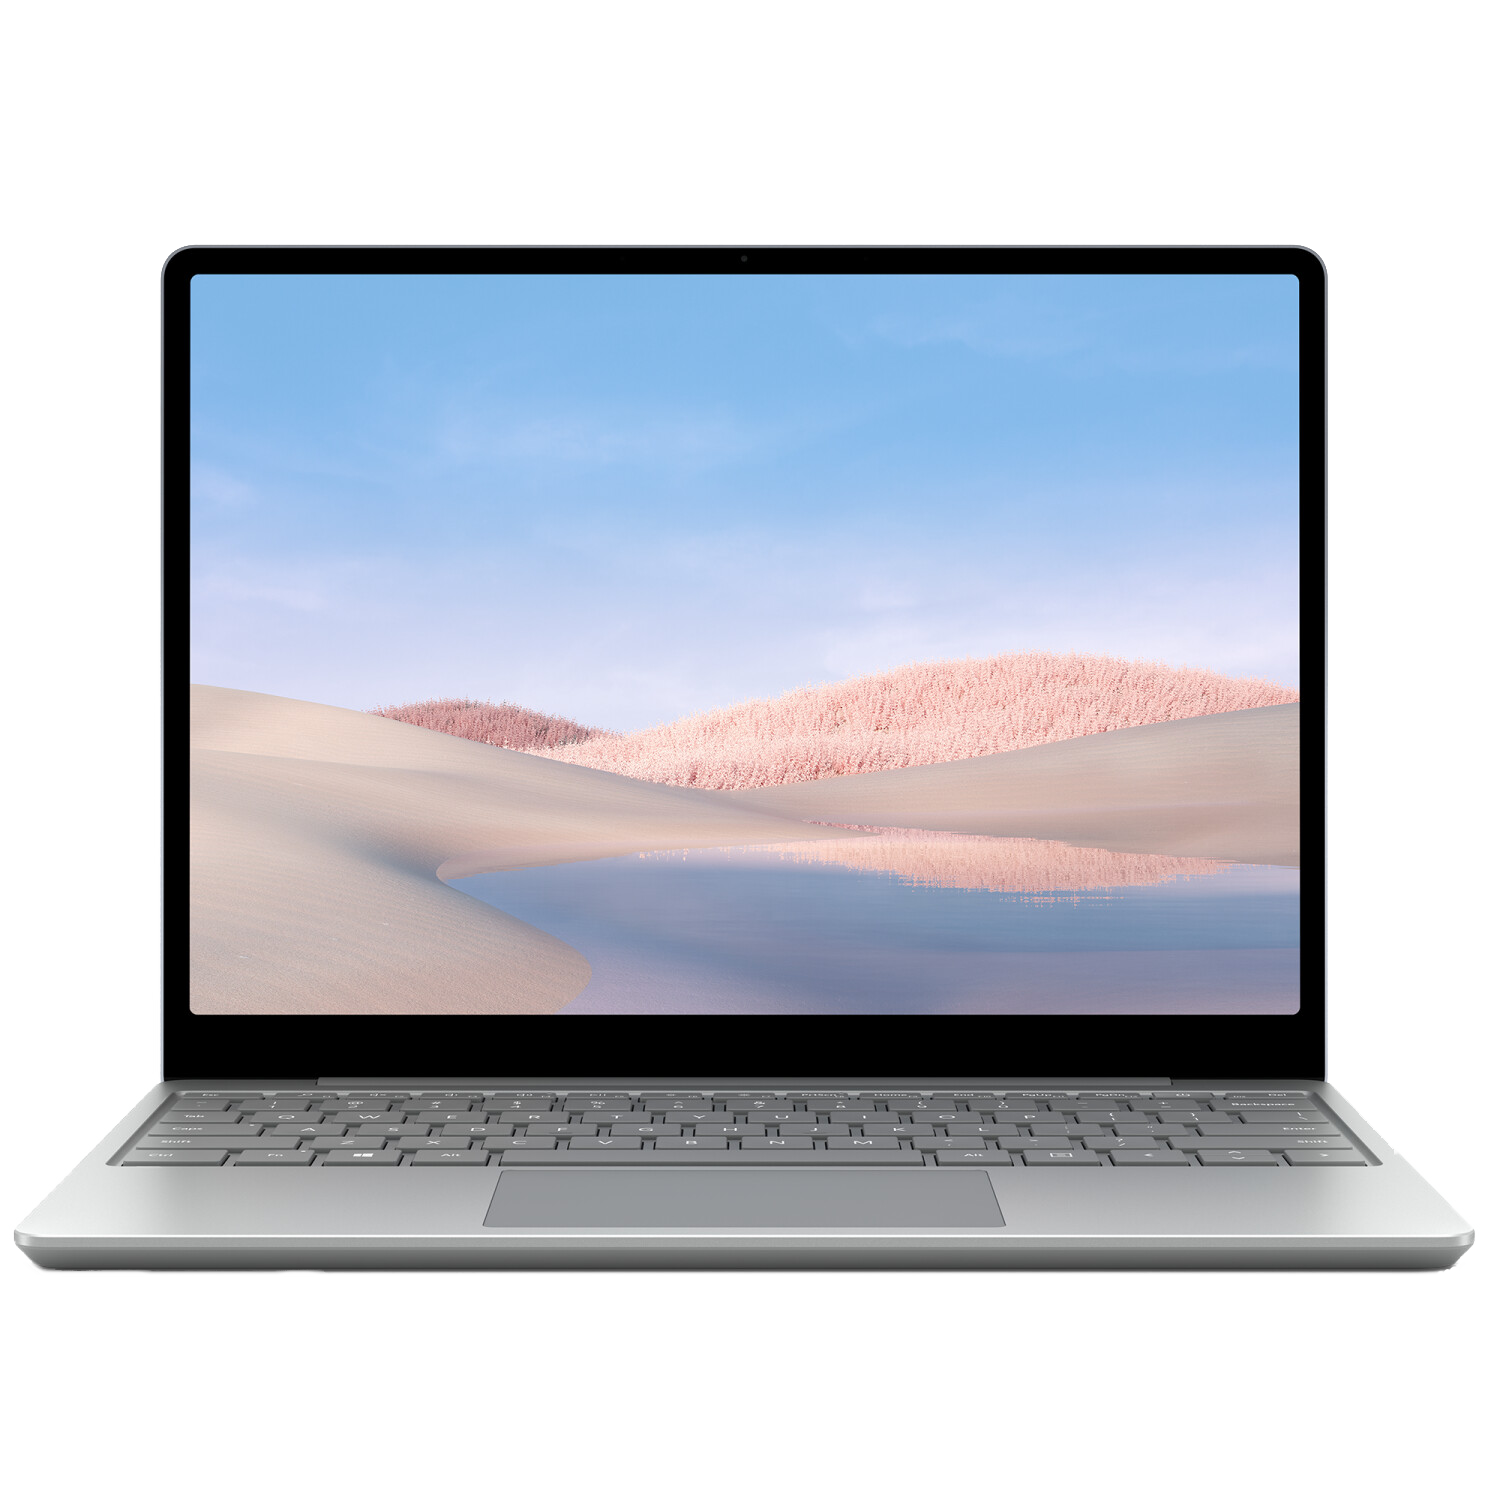 Microsoft Surface Laptop Go 12.4" 2020 Core i5 8/128 GB SSD W10H ‎THH-00009 QWERTY silber - Ohne Vertrag